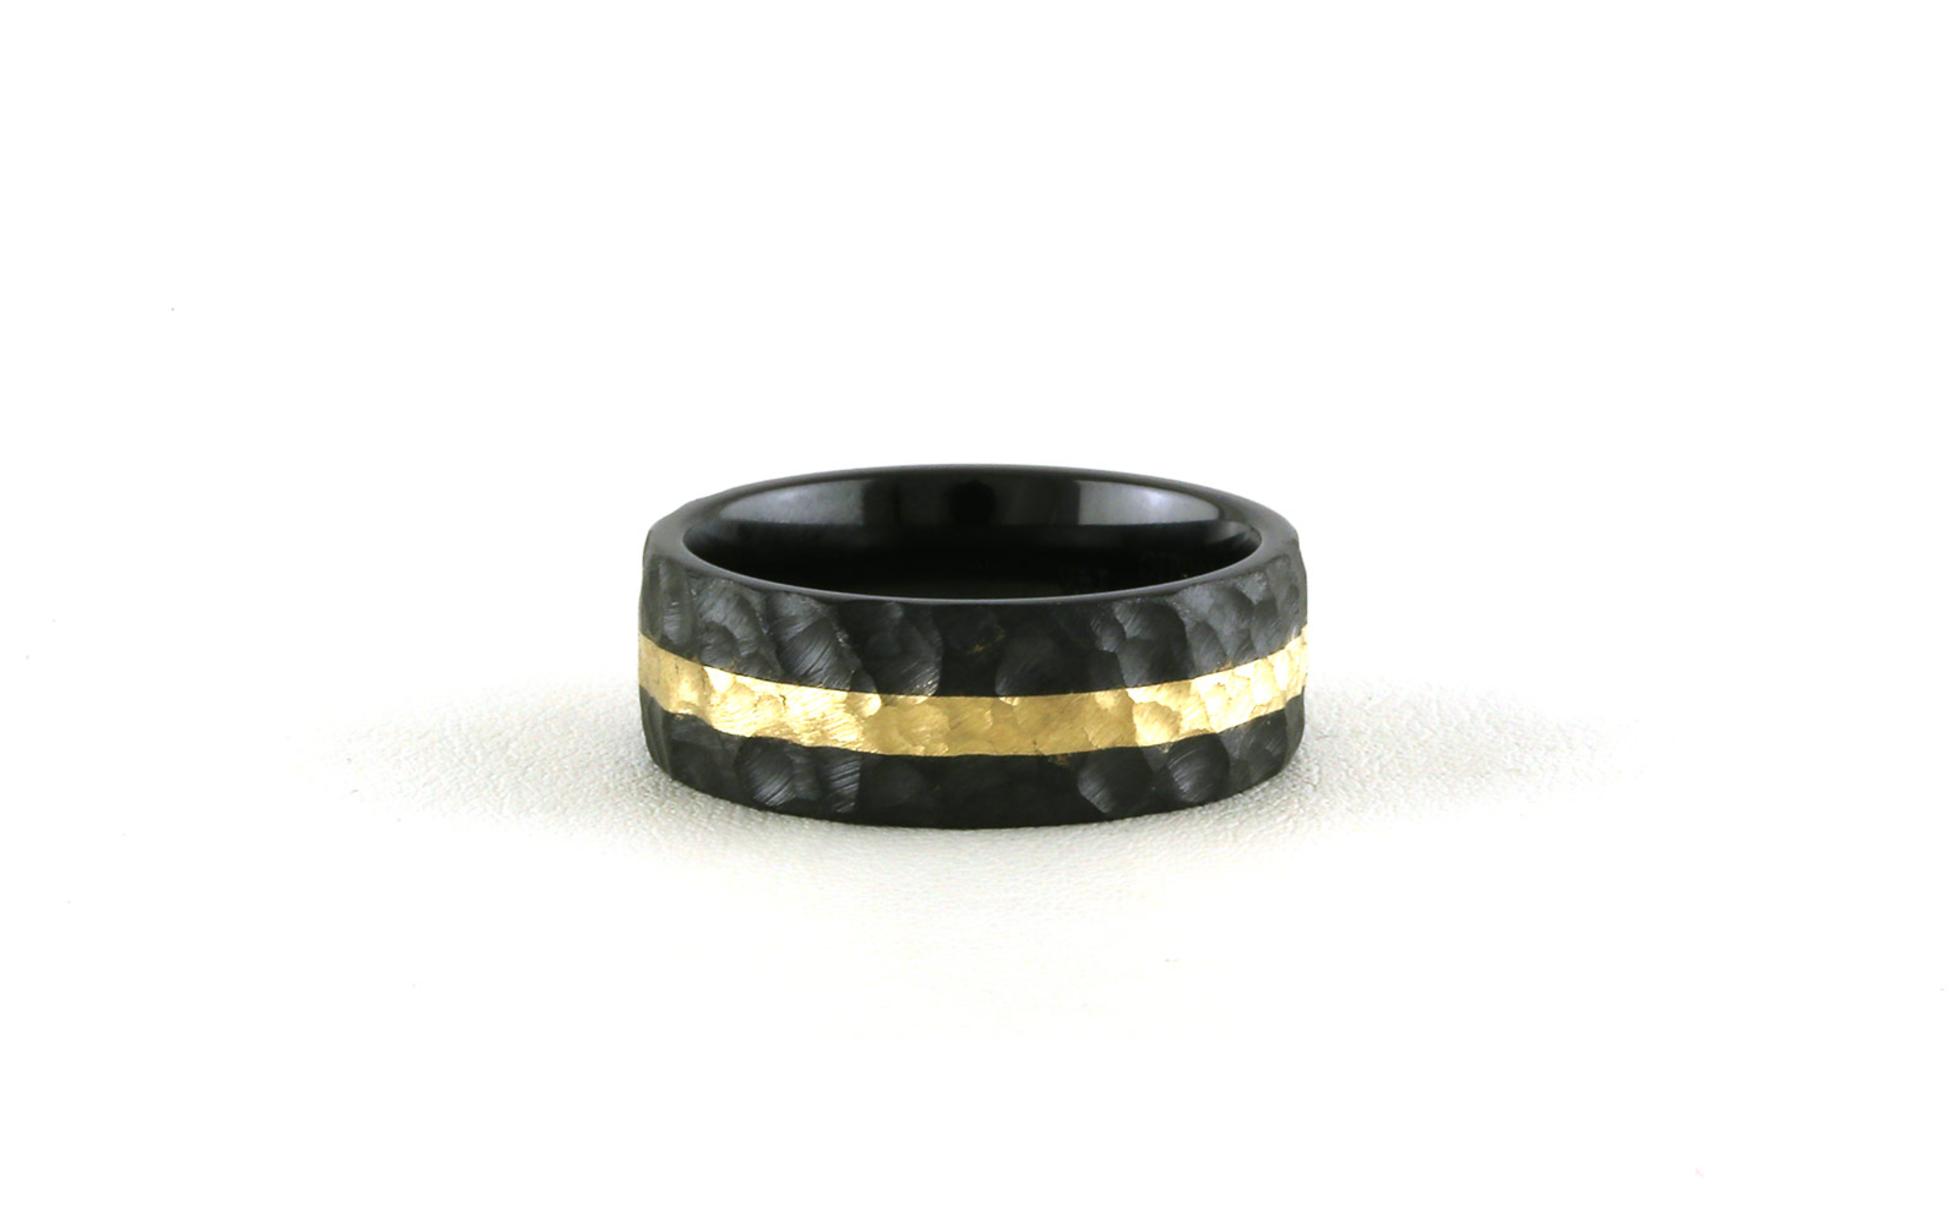 Comfort Fit Yellow Gold Inlay Wedding Band with Hammered Texture in Black Ceramic (sz 9.5)